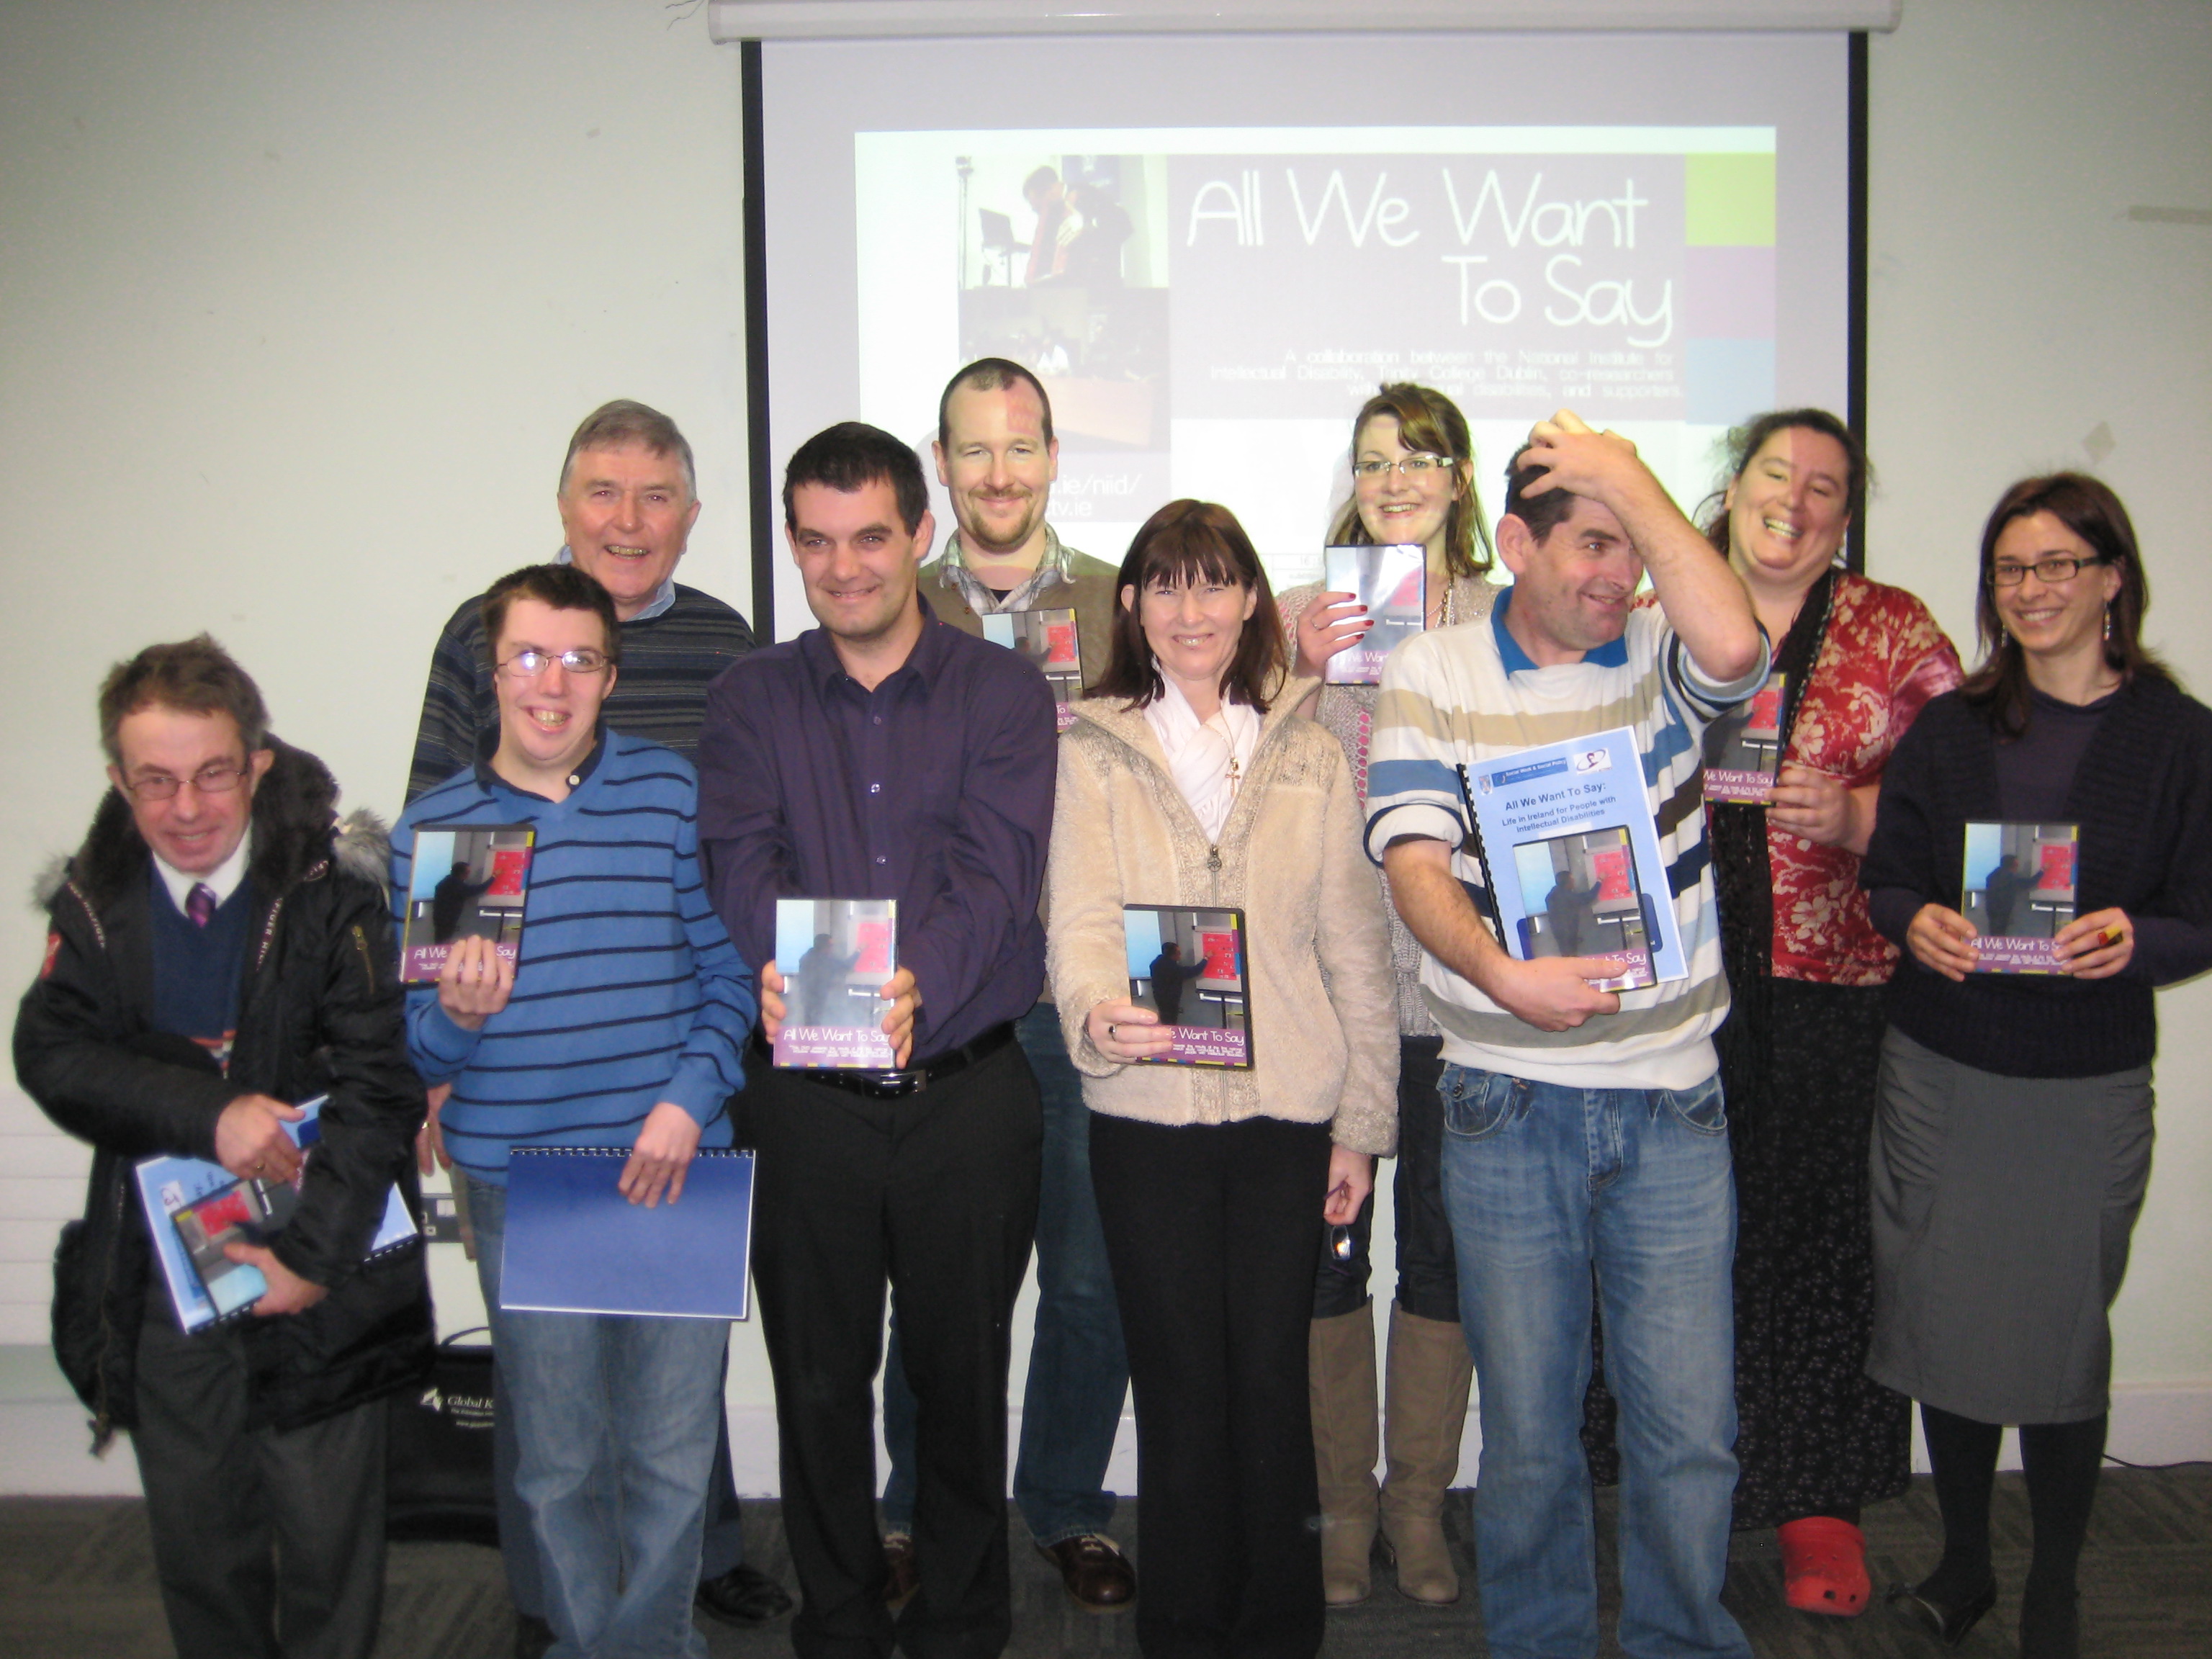 Members of the All We Want to Say Project have a group photo at the NIID, Trinity College. They are holding All We Want to Say Study Reports and the DVDs.